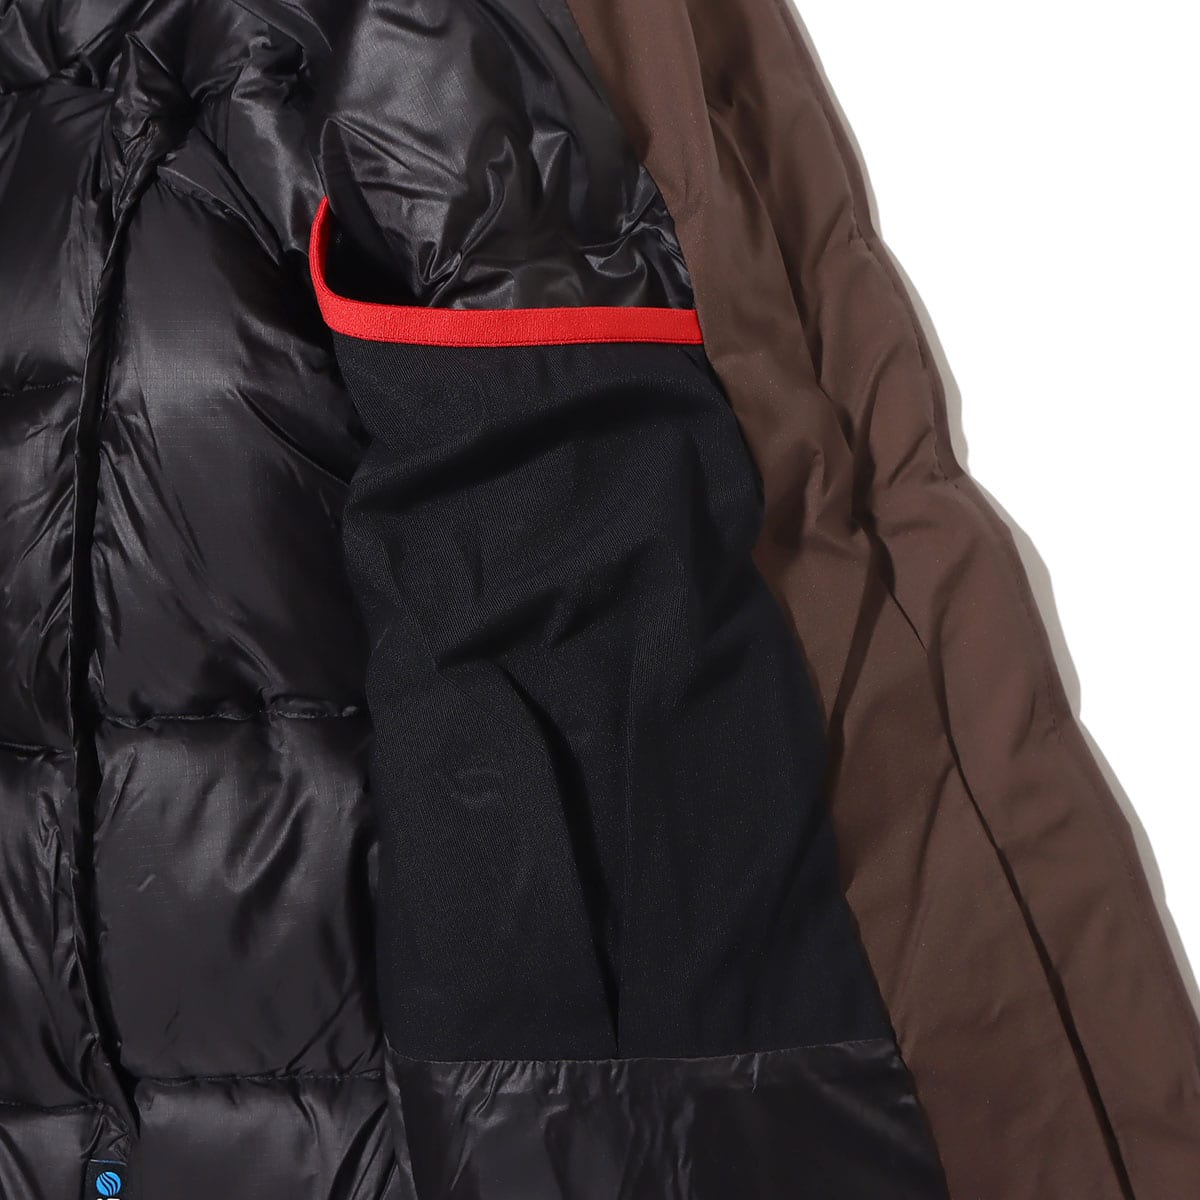 THE NORTH FACE BELAYER PARKA ココアブラウン 22FW-I